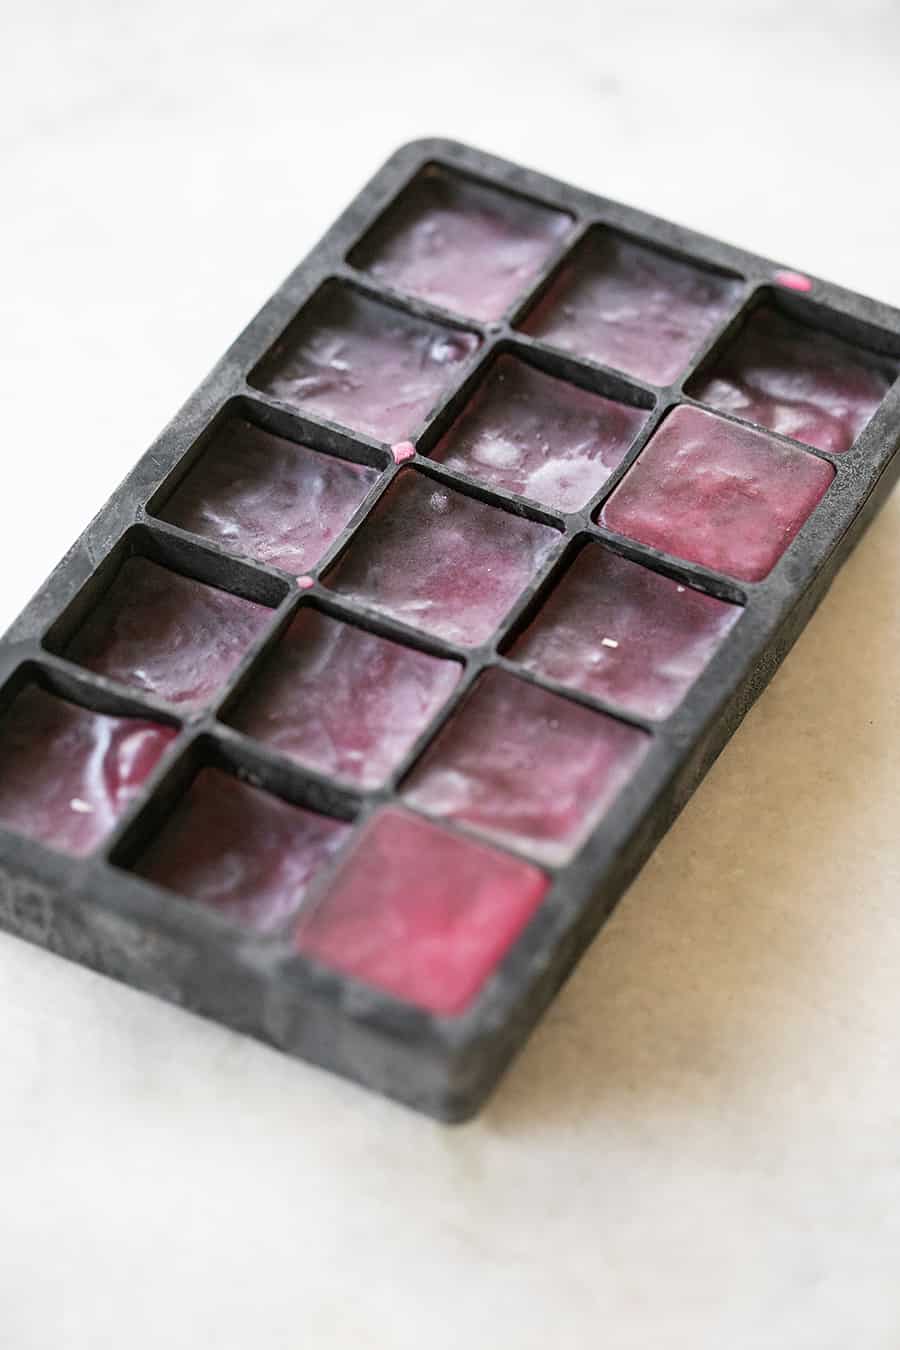 pink ice cubes in an ice cube tray 